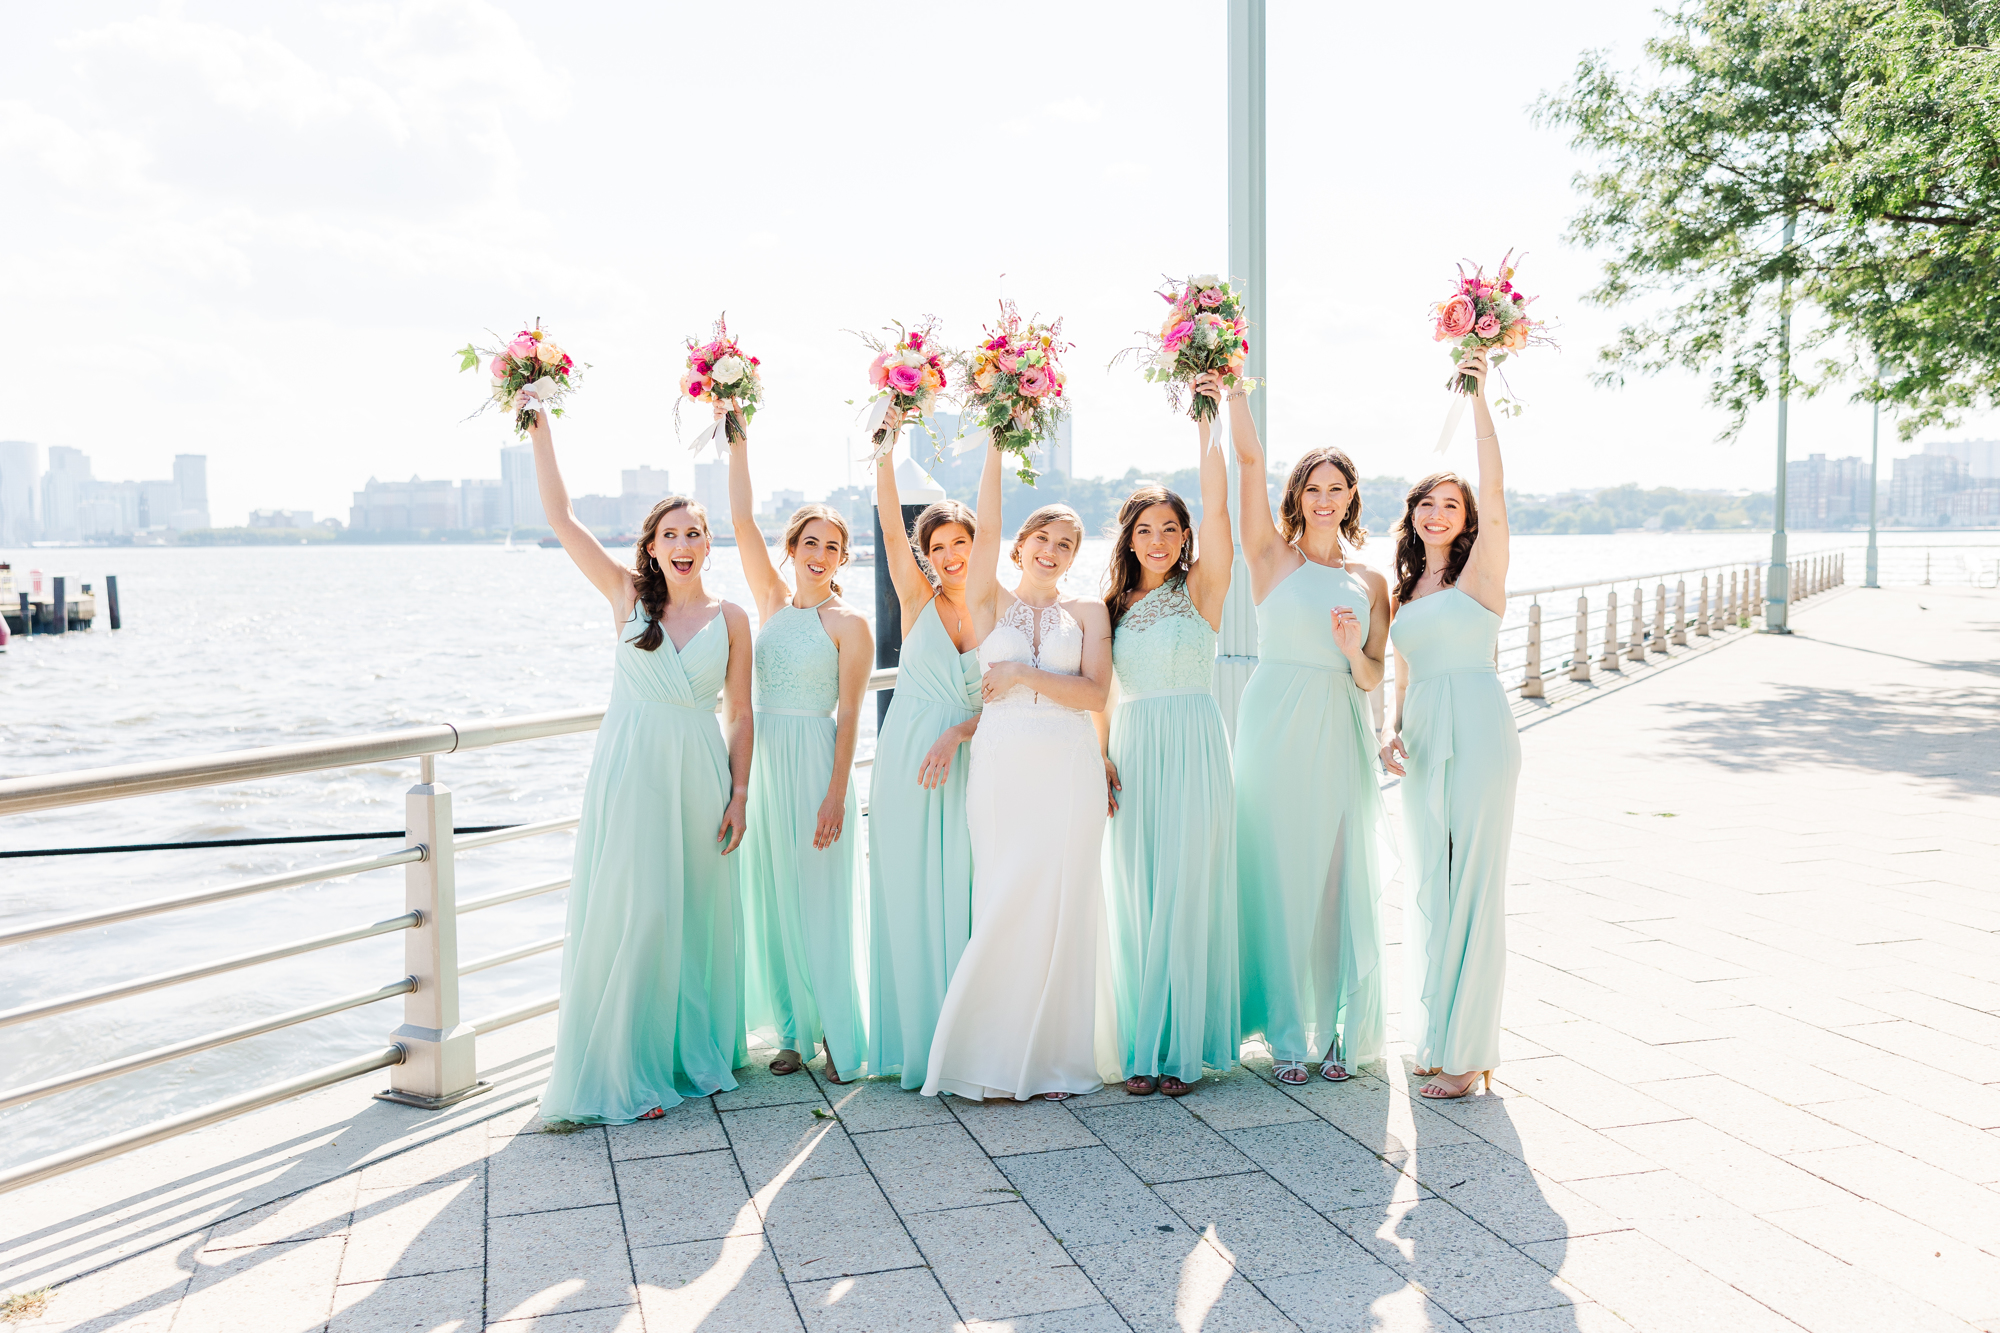 Fun Wedding Photography in New York City on a Boat